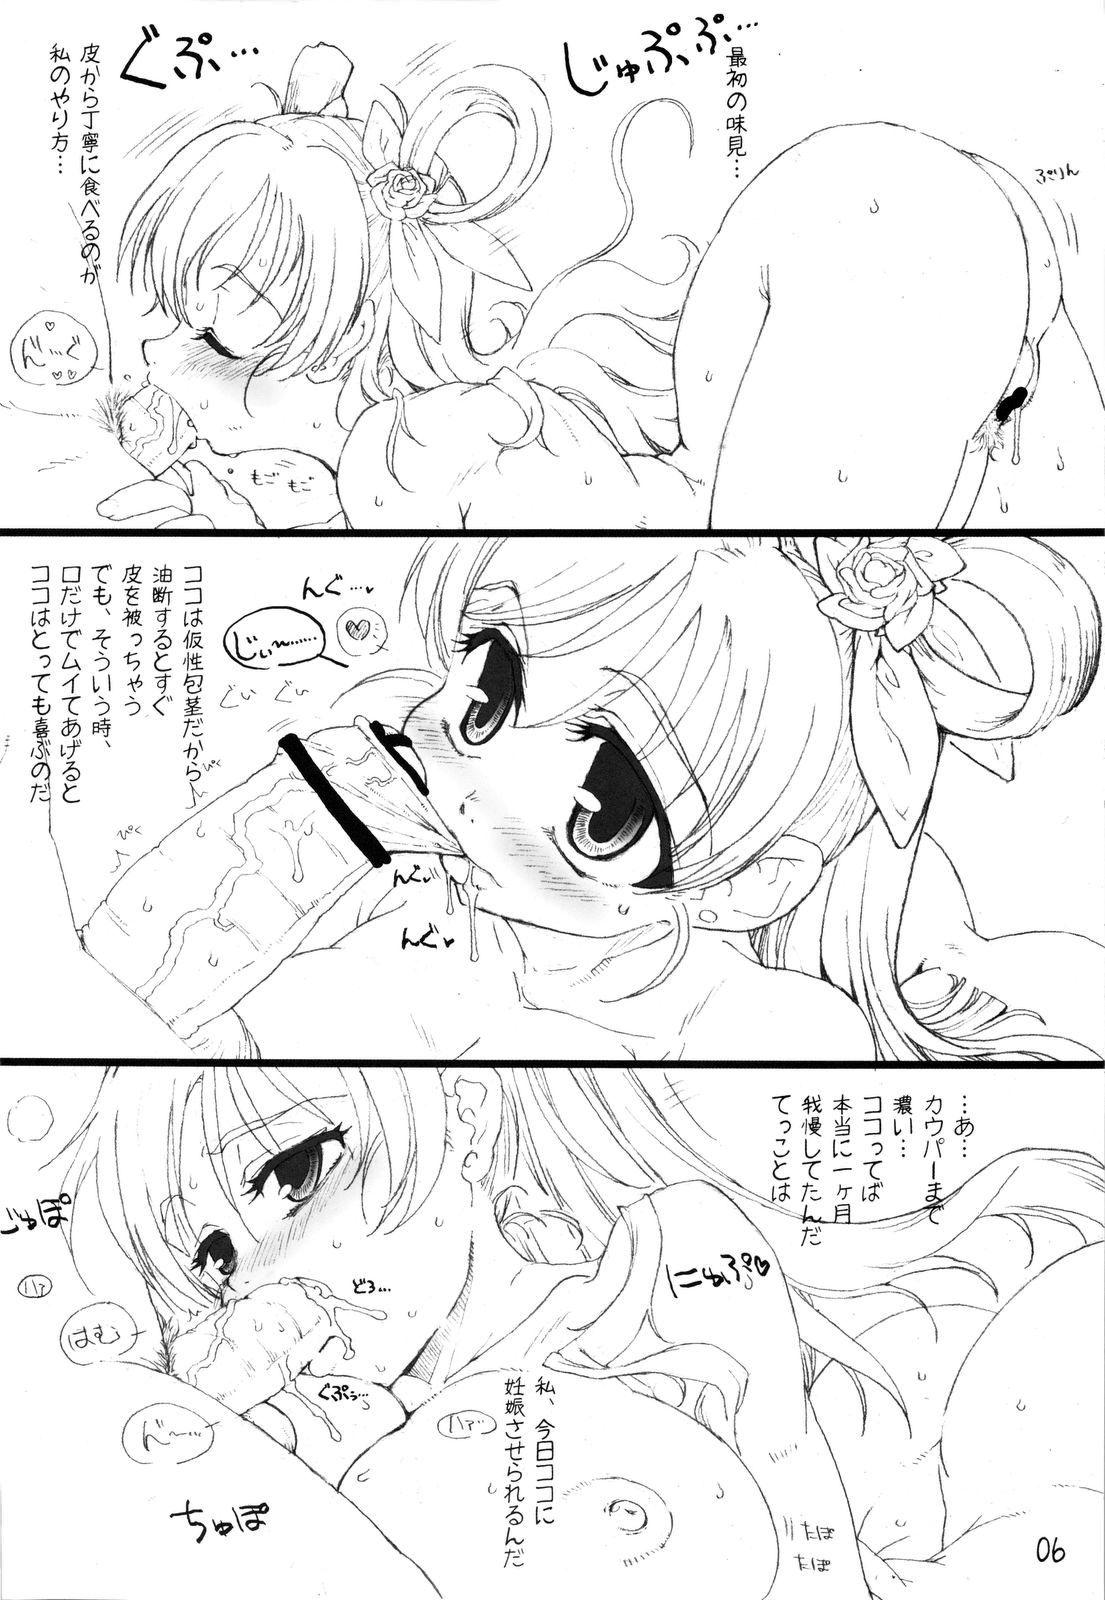 Thief Dream to Issho! - Yes precure 5 Man - Page 6